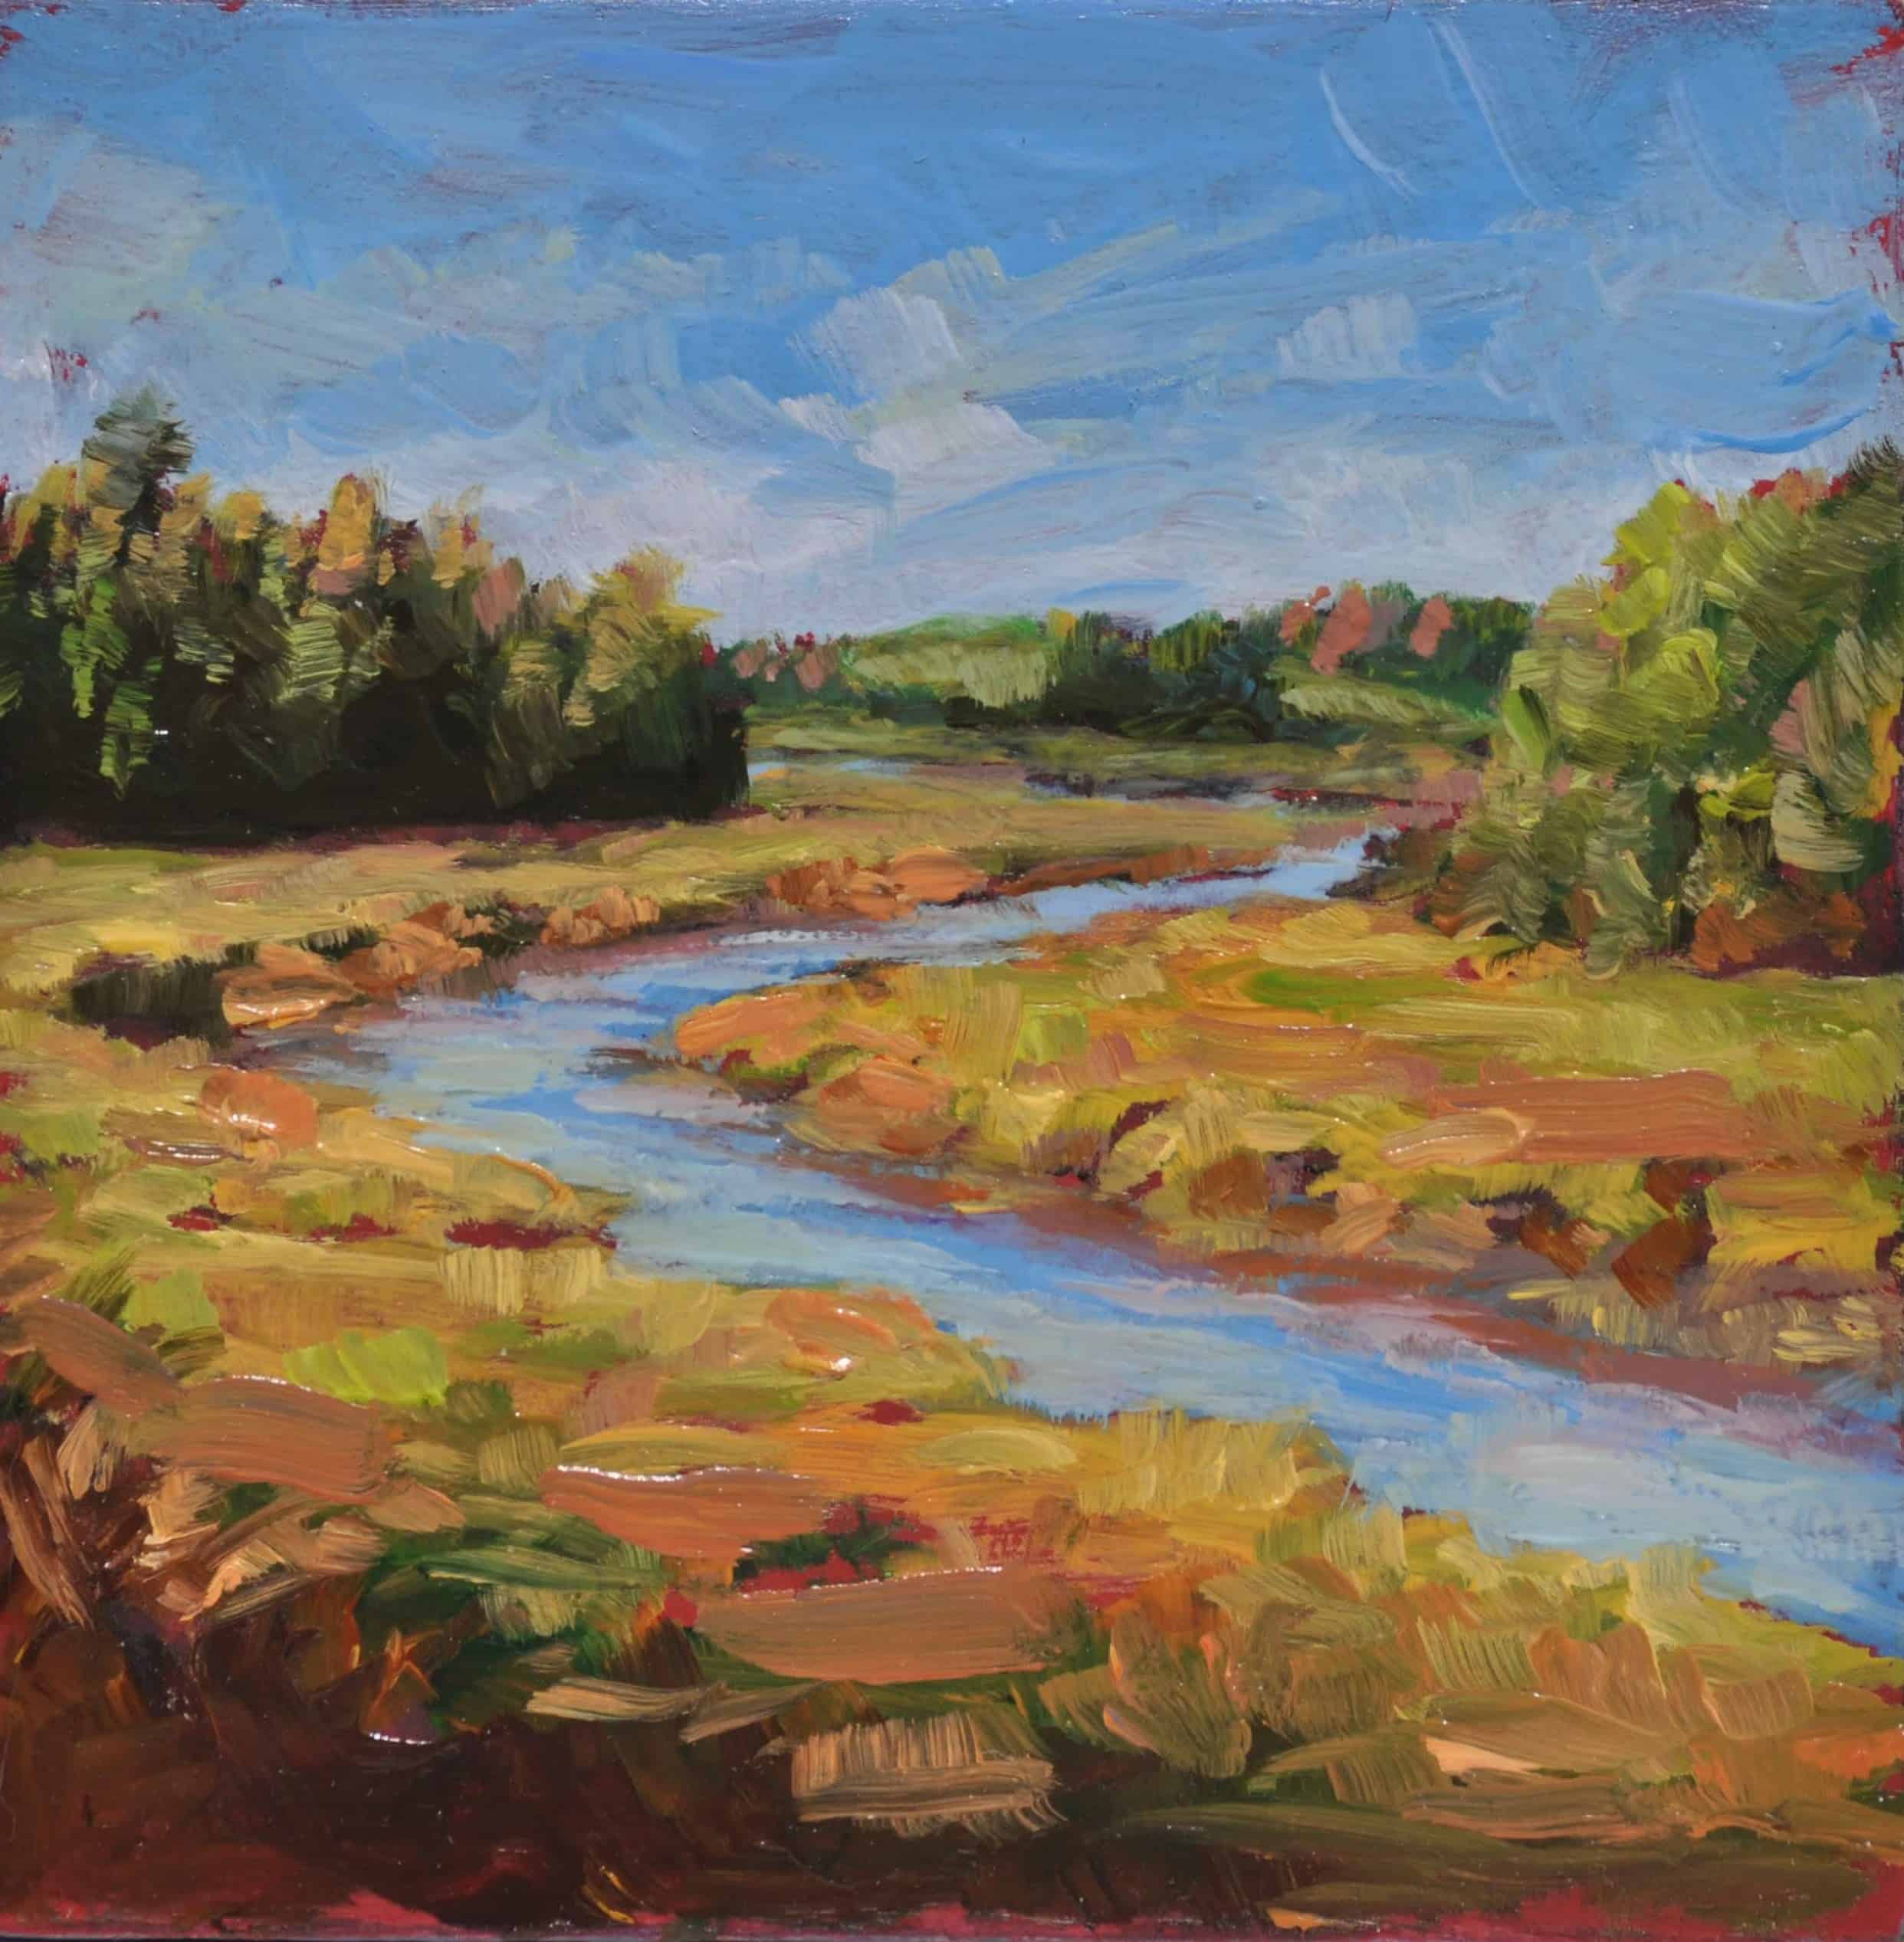 Kim Aerts oil painting - St. Croix River Outgoing - 4x4 inches